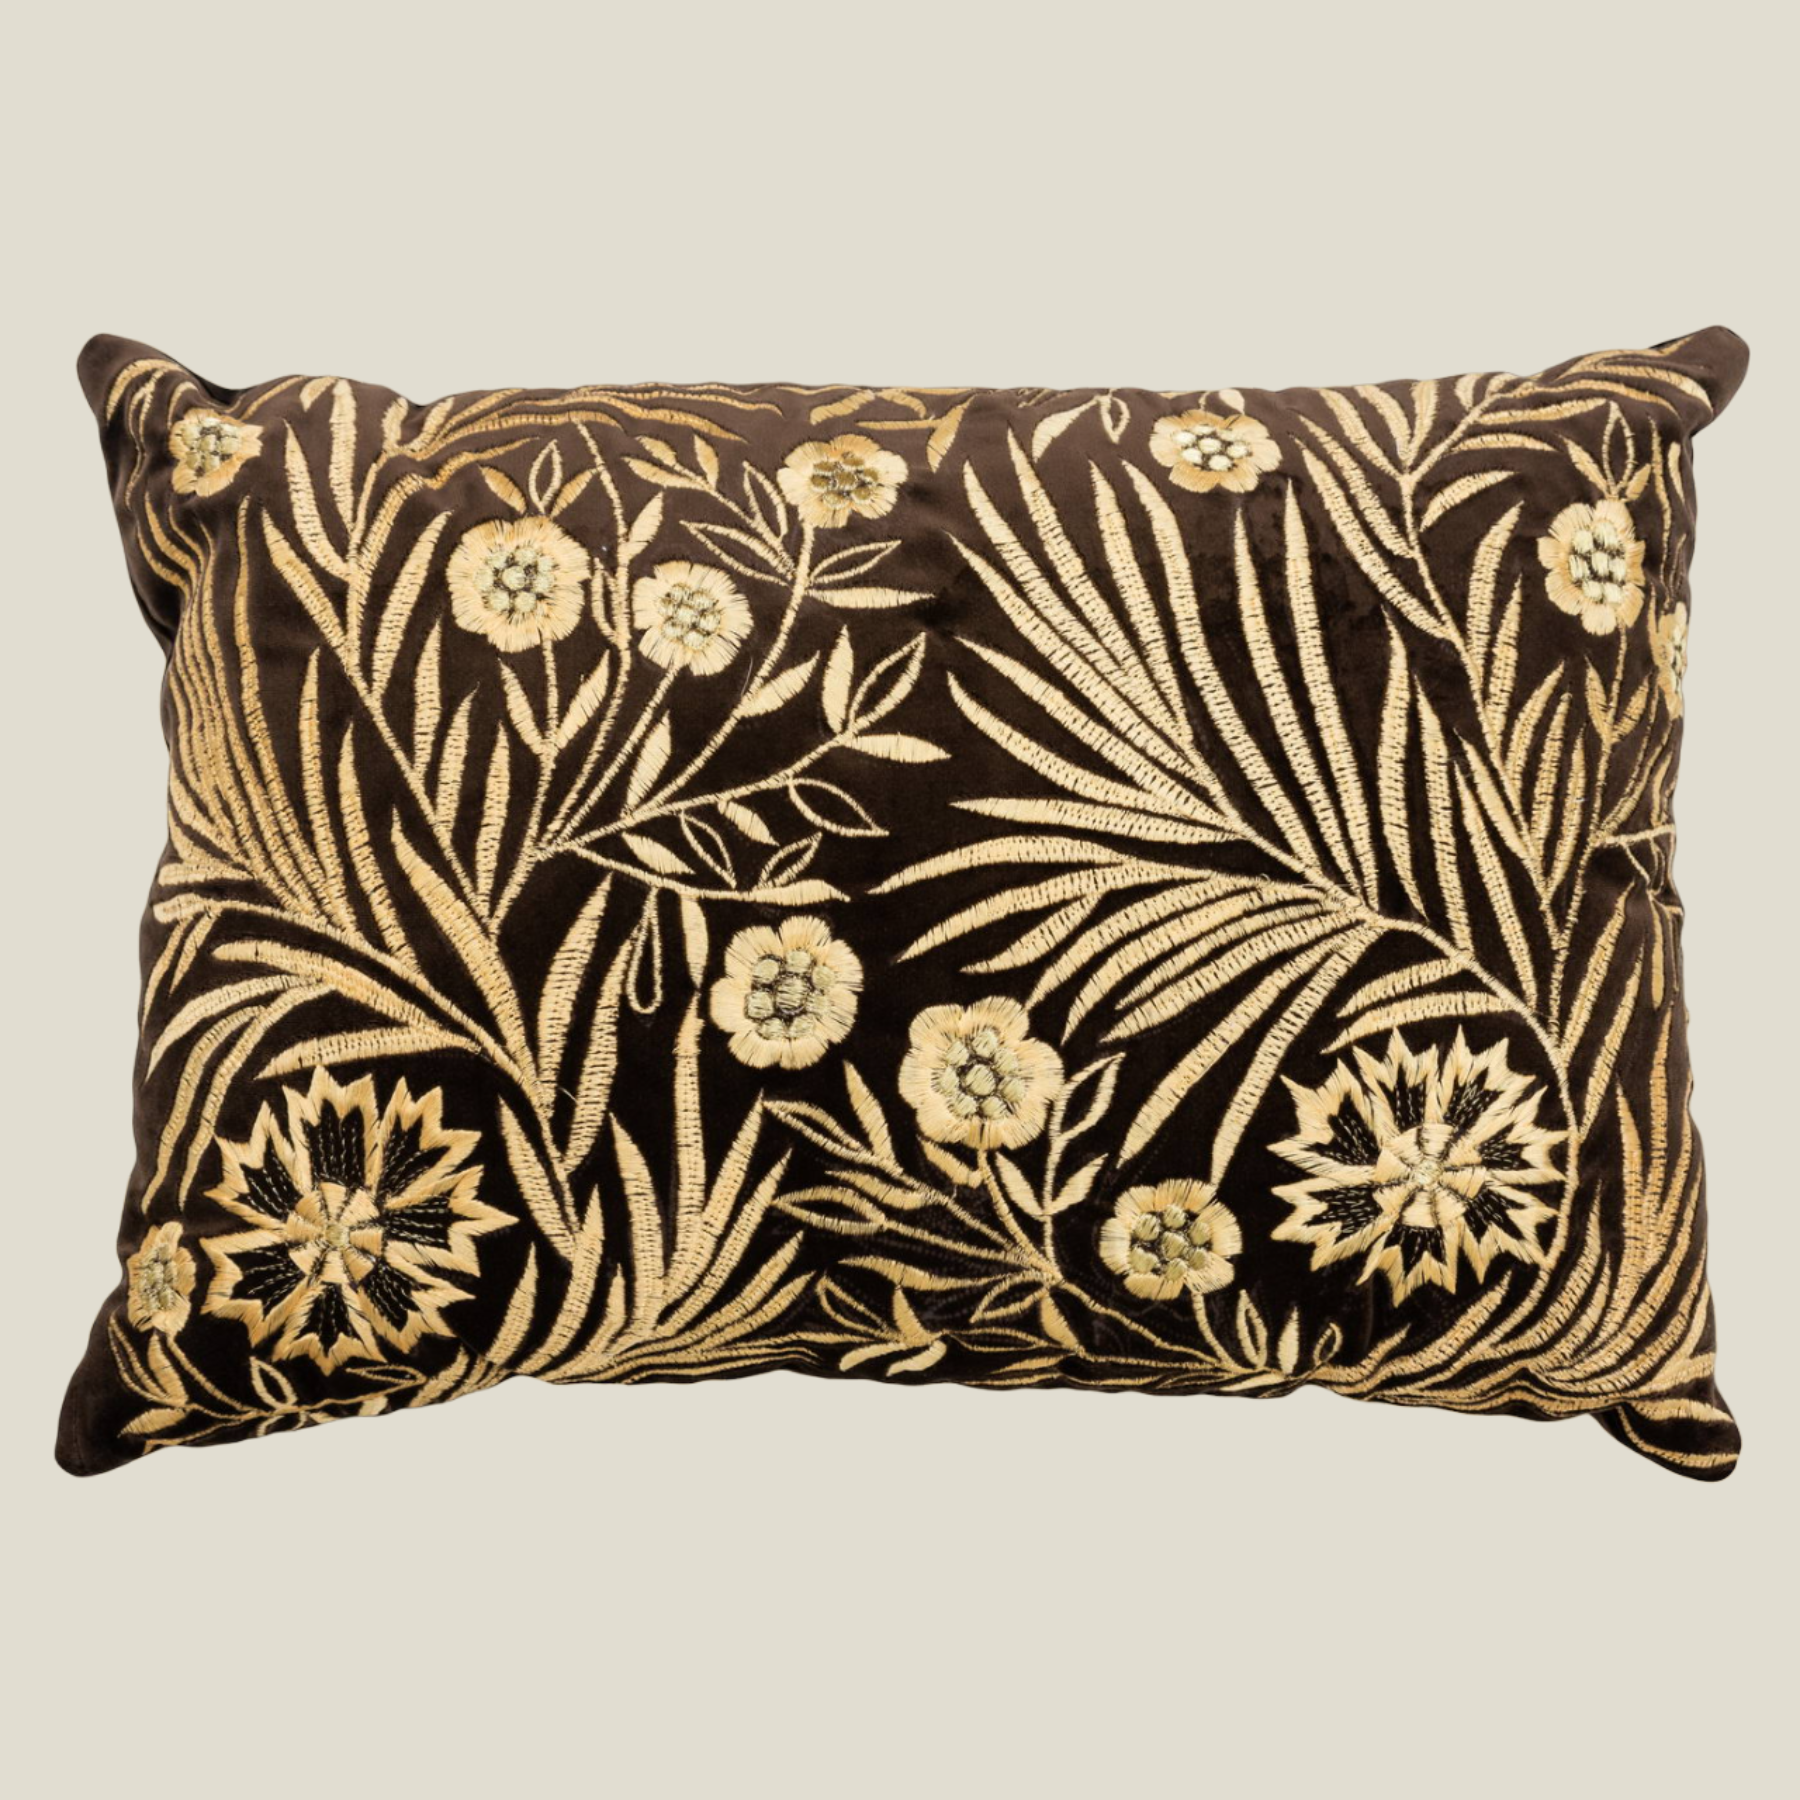 The Luxelife Brown Velvet Floral Fully Embroidered Cushion Cover